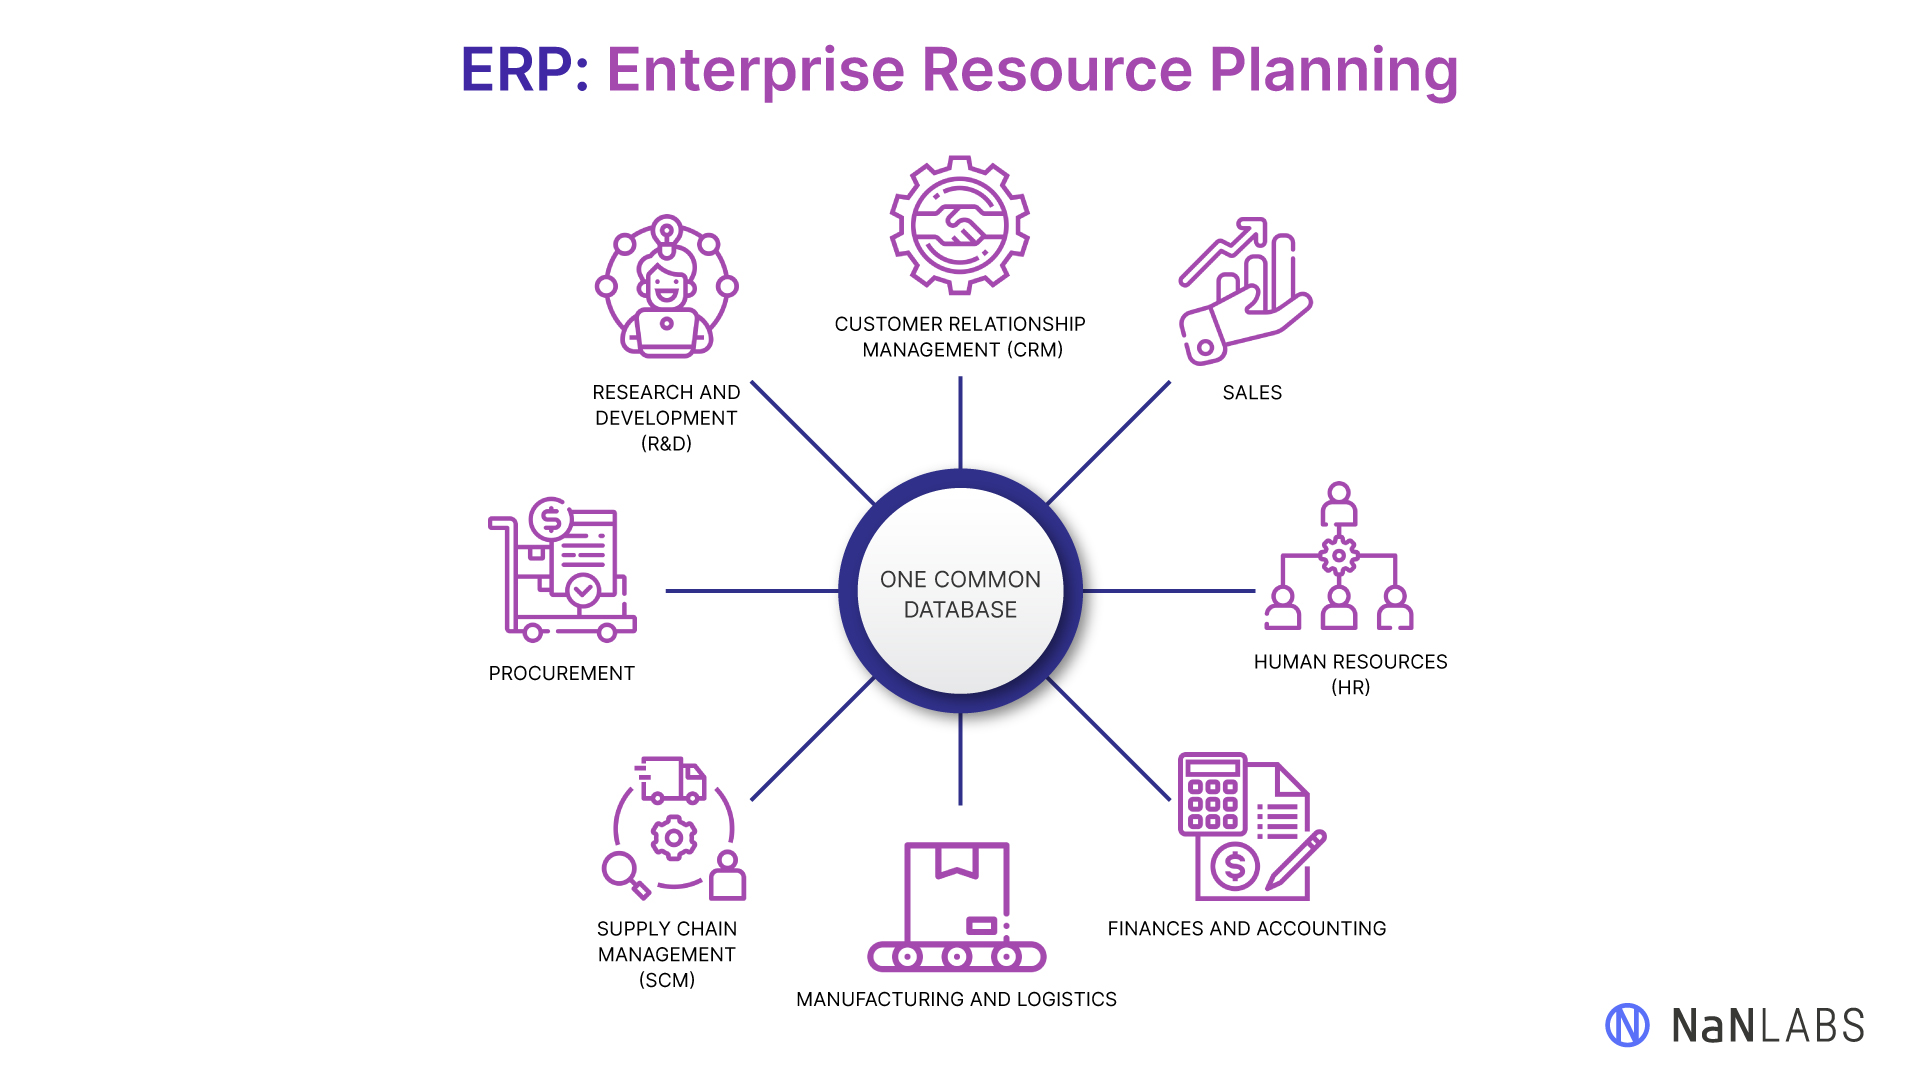 Diagram showing a common database powering different elements of an enterprise resource planning system, like human resources and customer relationship management.